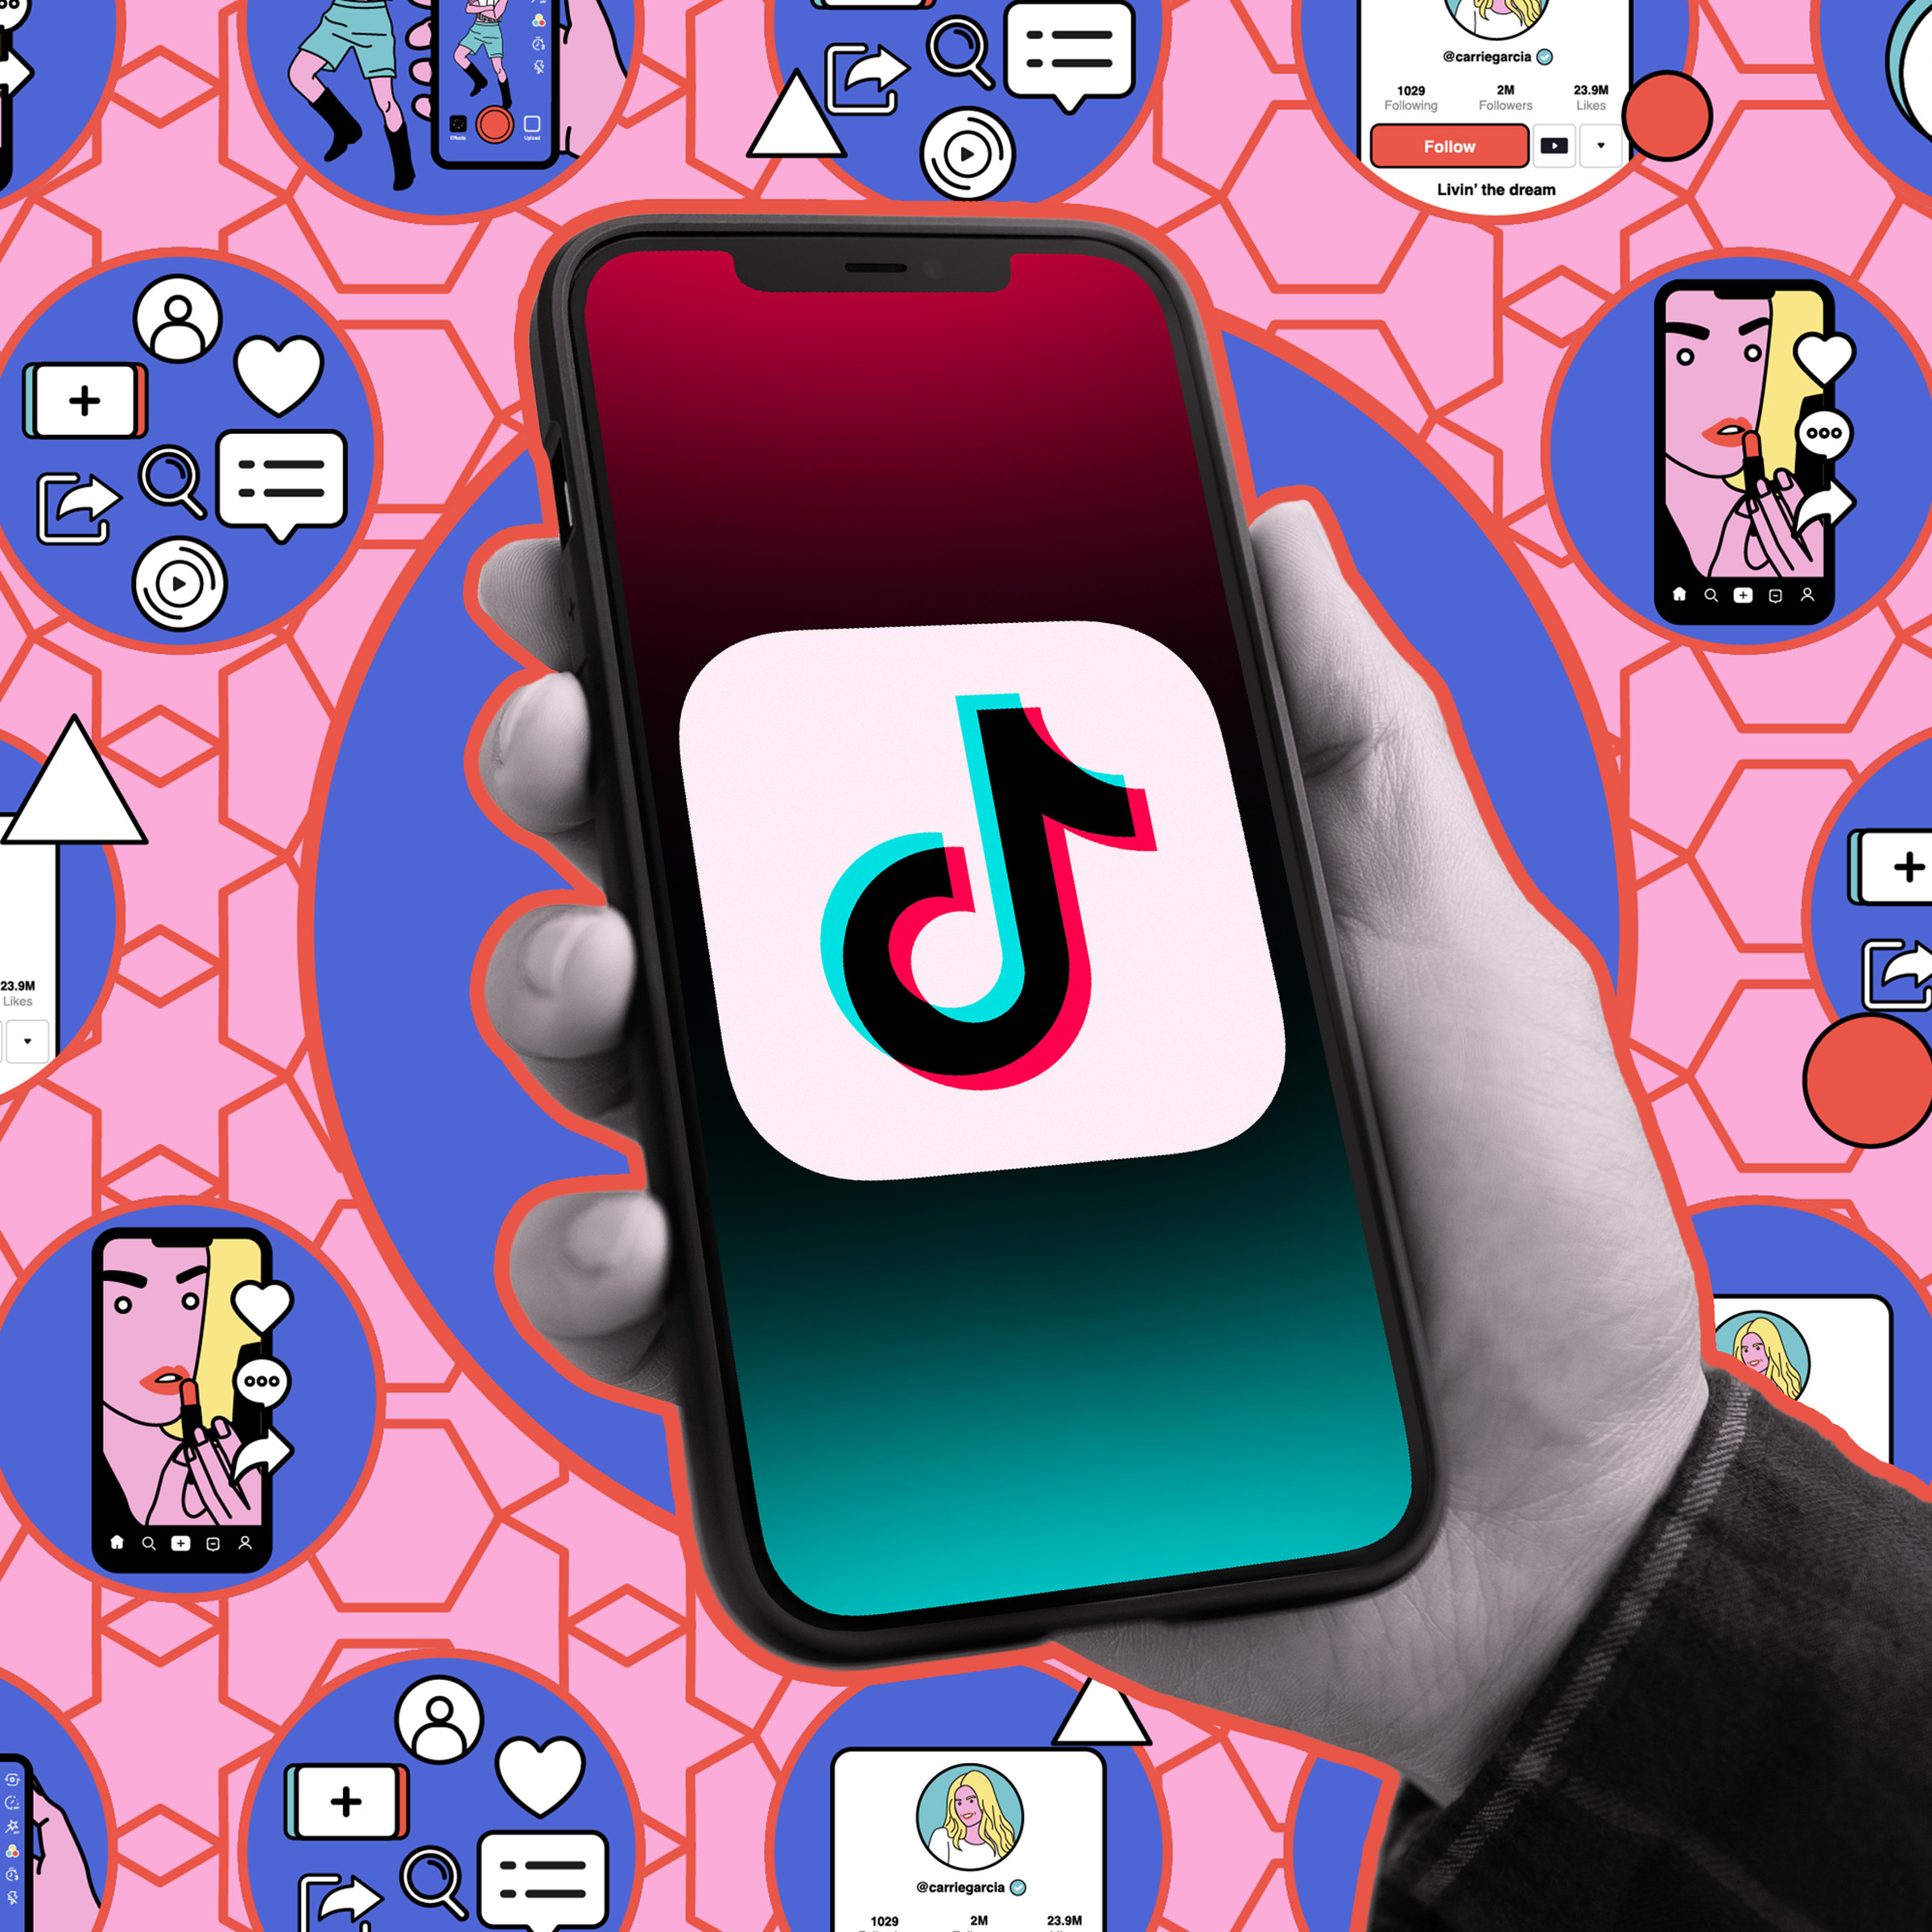 Hand holding a mobile phone with a TikTok symbol on it and a background of illustrations.